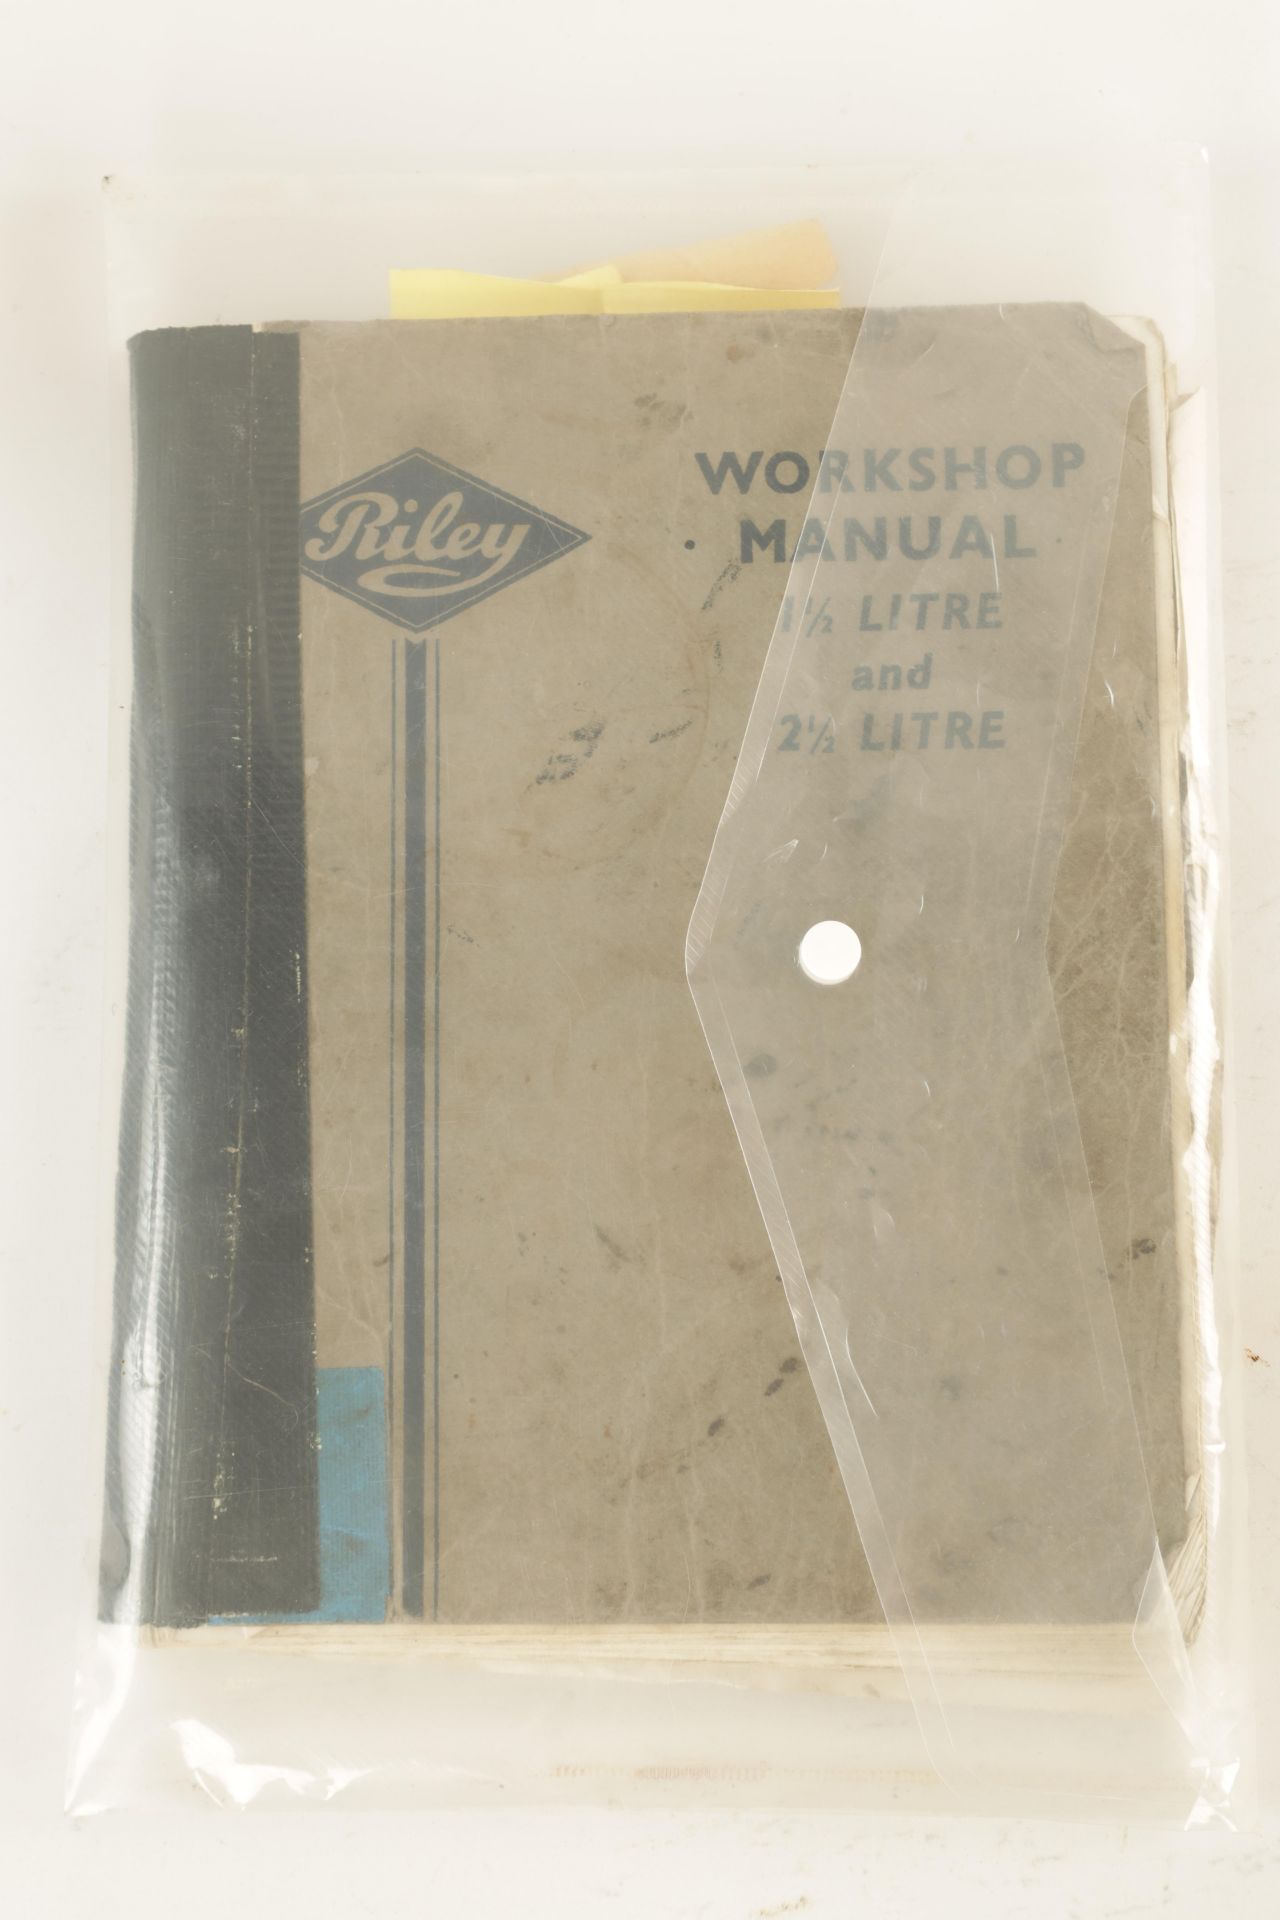 A COLLECTION OF VARIOUS RILEY BOOKS AND WORKSHOP MANUAL - Image 9 of 10